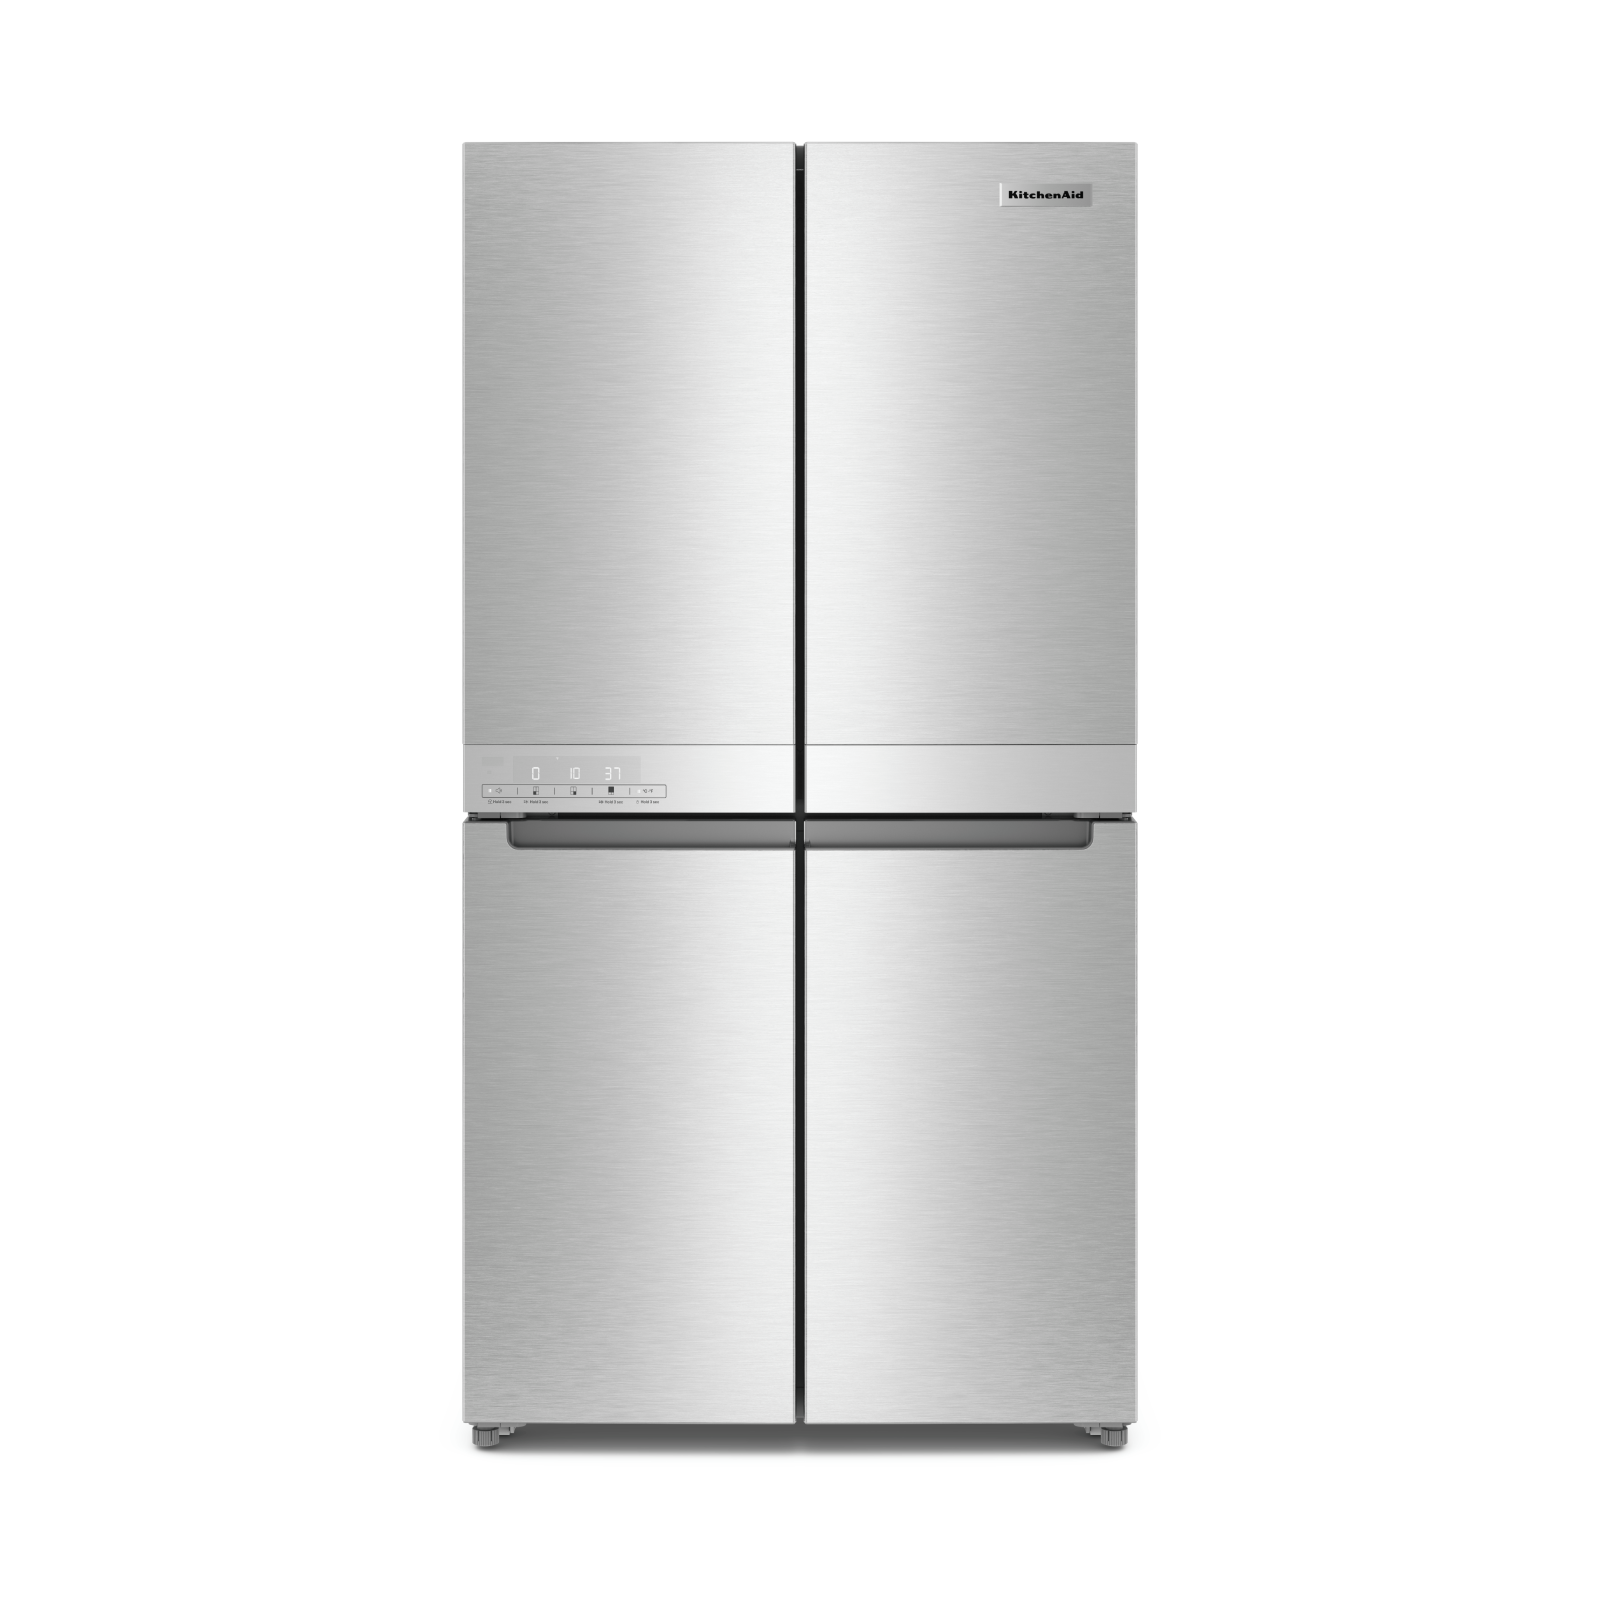 KitchenAid - 35.75 Inch 19.4 cu. ft 4-Door Refrigerator in Stainless - KRQC506MPS